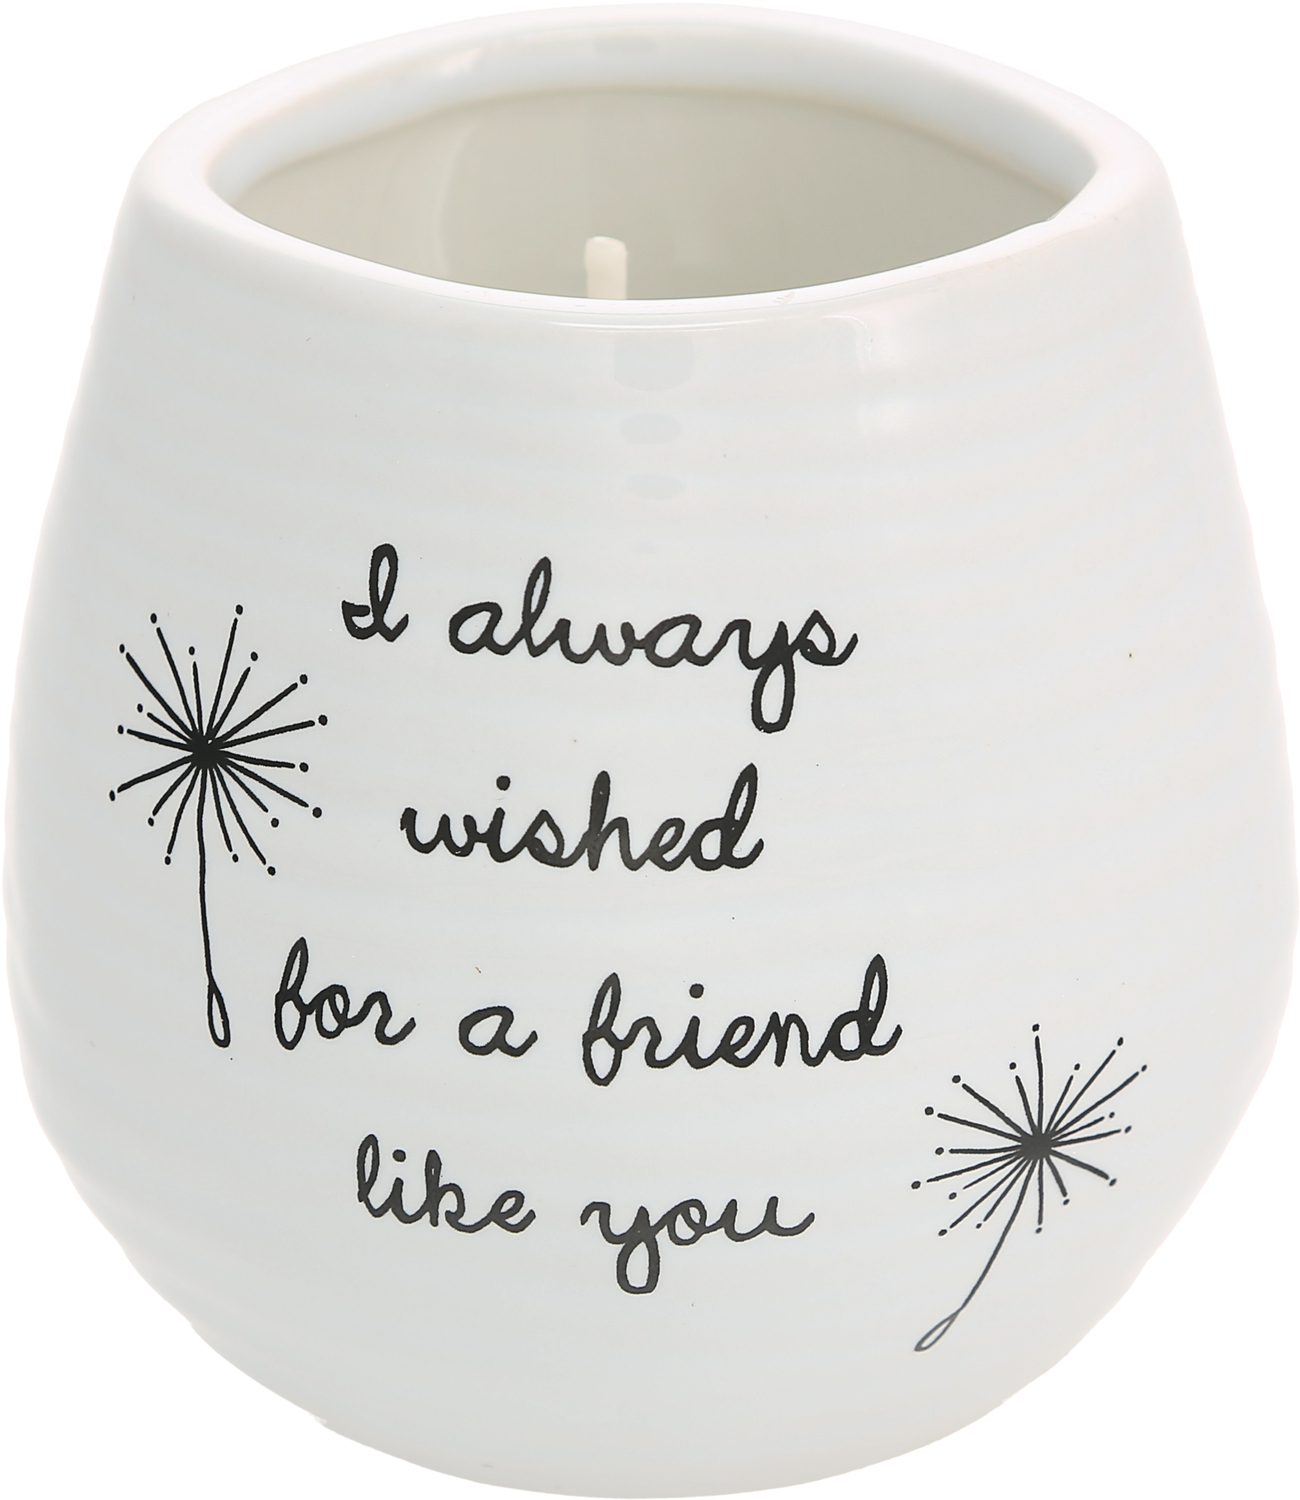 Friend Like You by Dandelion Wishes - Friend Like You - 8 oz - 100% Soy Wax Candle
Scent: Serenity